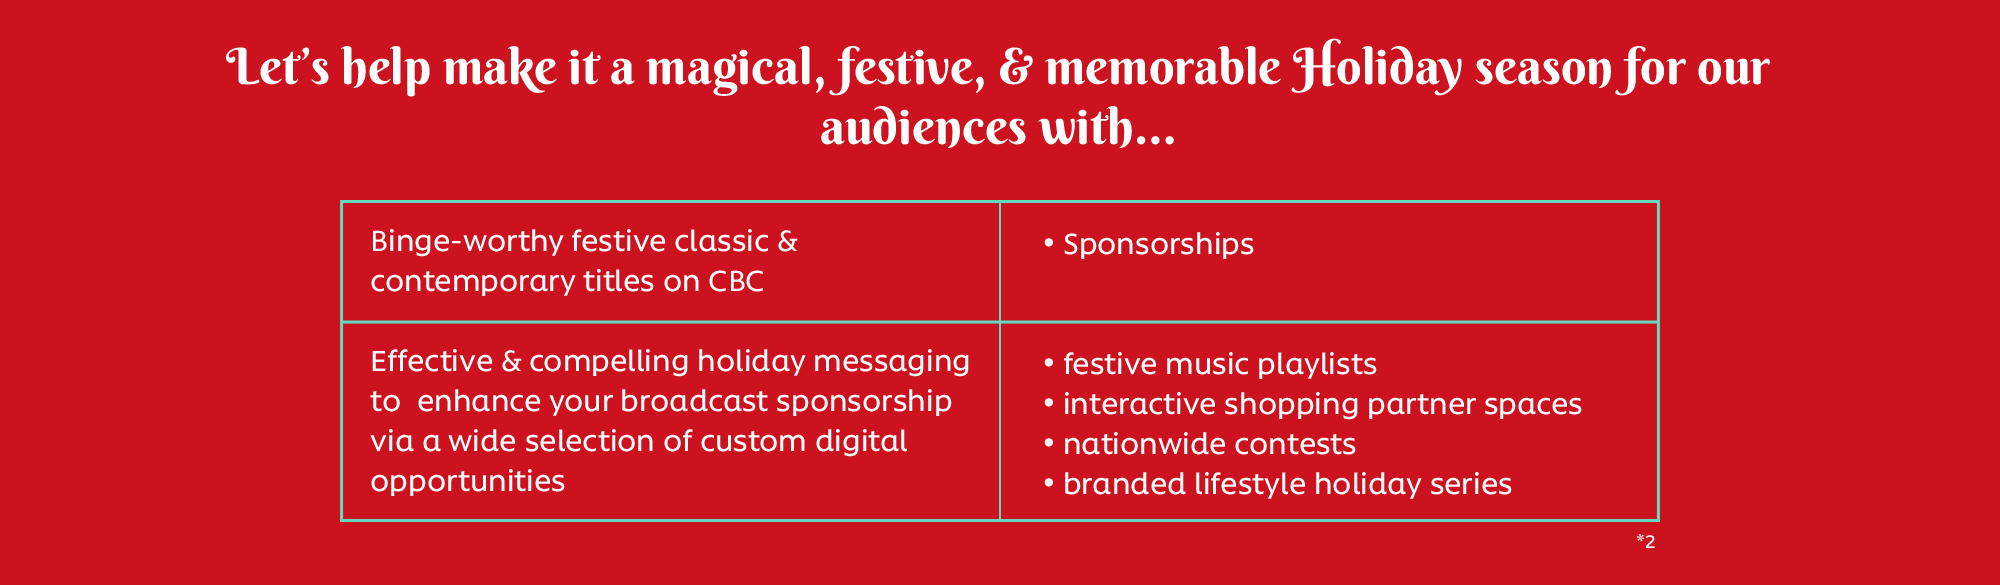 Let’s help make it a magical, festive, & memorable Holiday season for our audiences